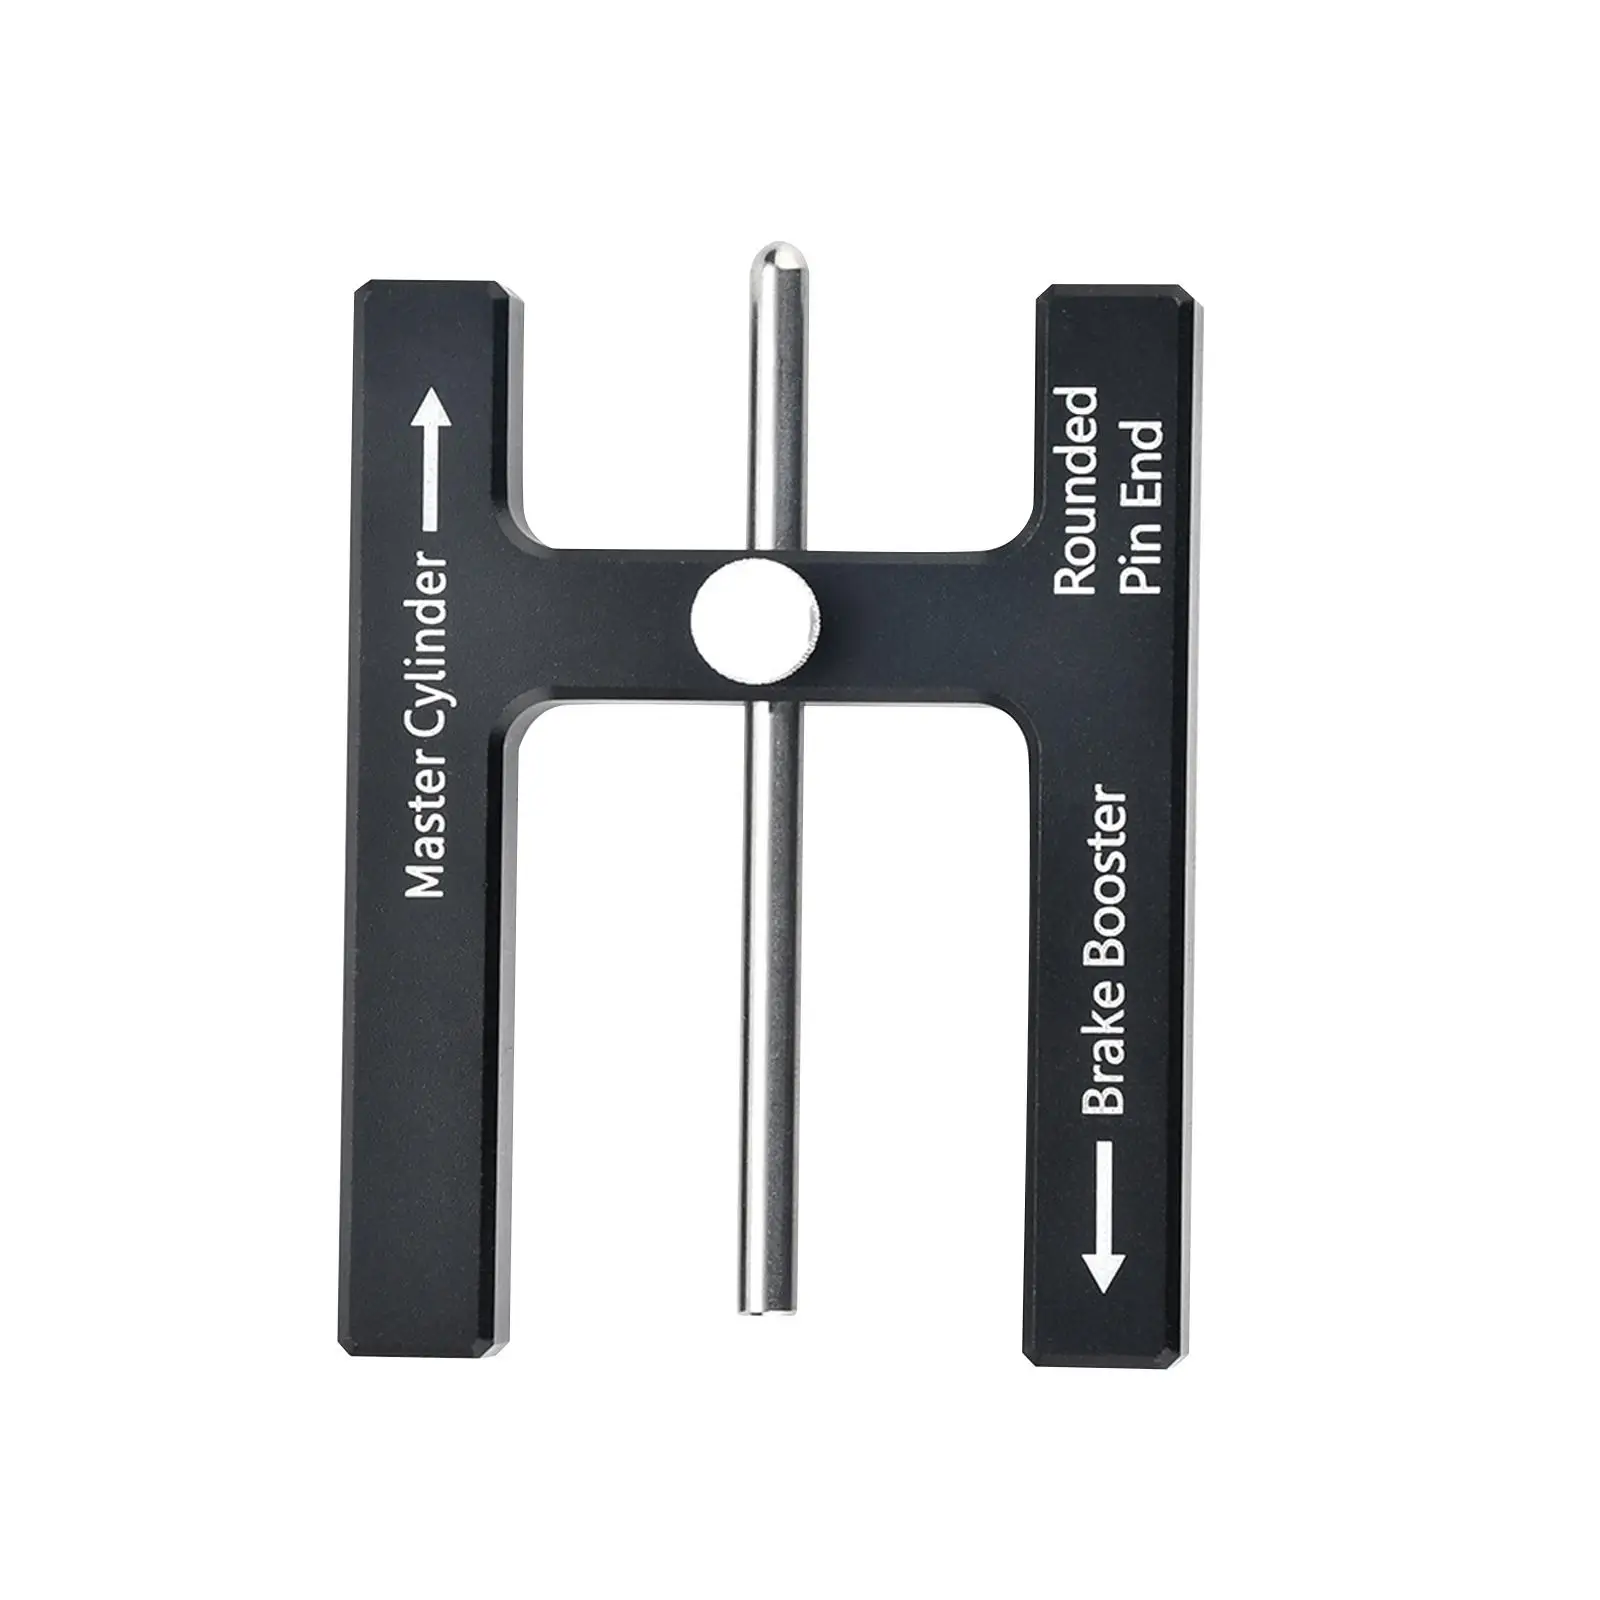 Brake Booster Adjustment Tool Accessory Replacement Brake Adjustment Tool for